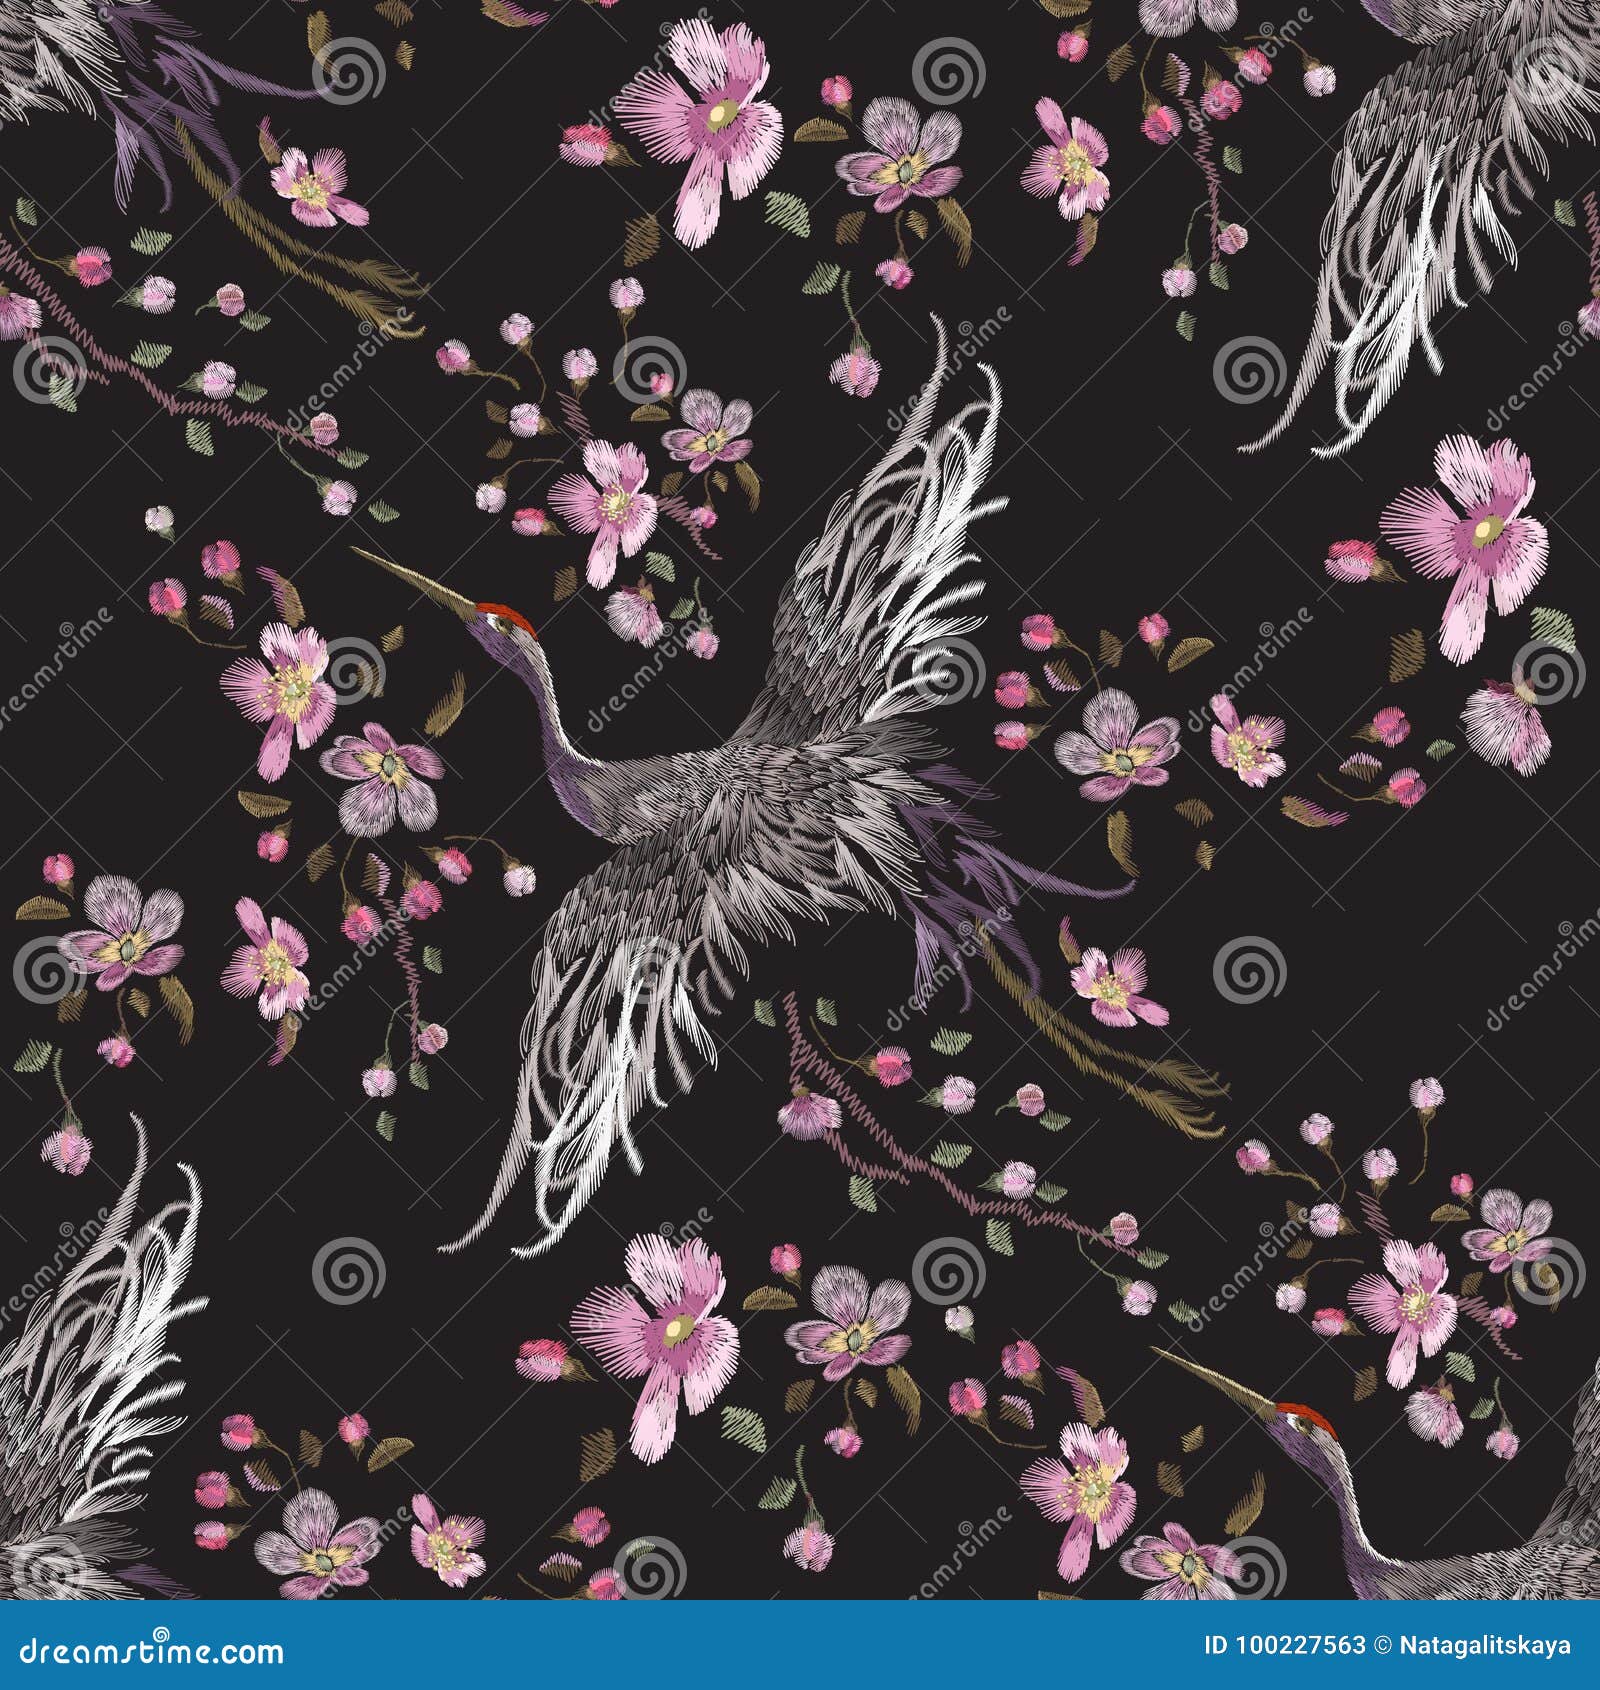 embroidery oriental seamless pattern with cranes and cherry blossom.